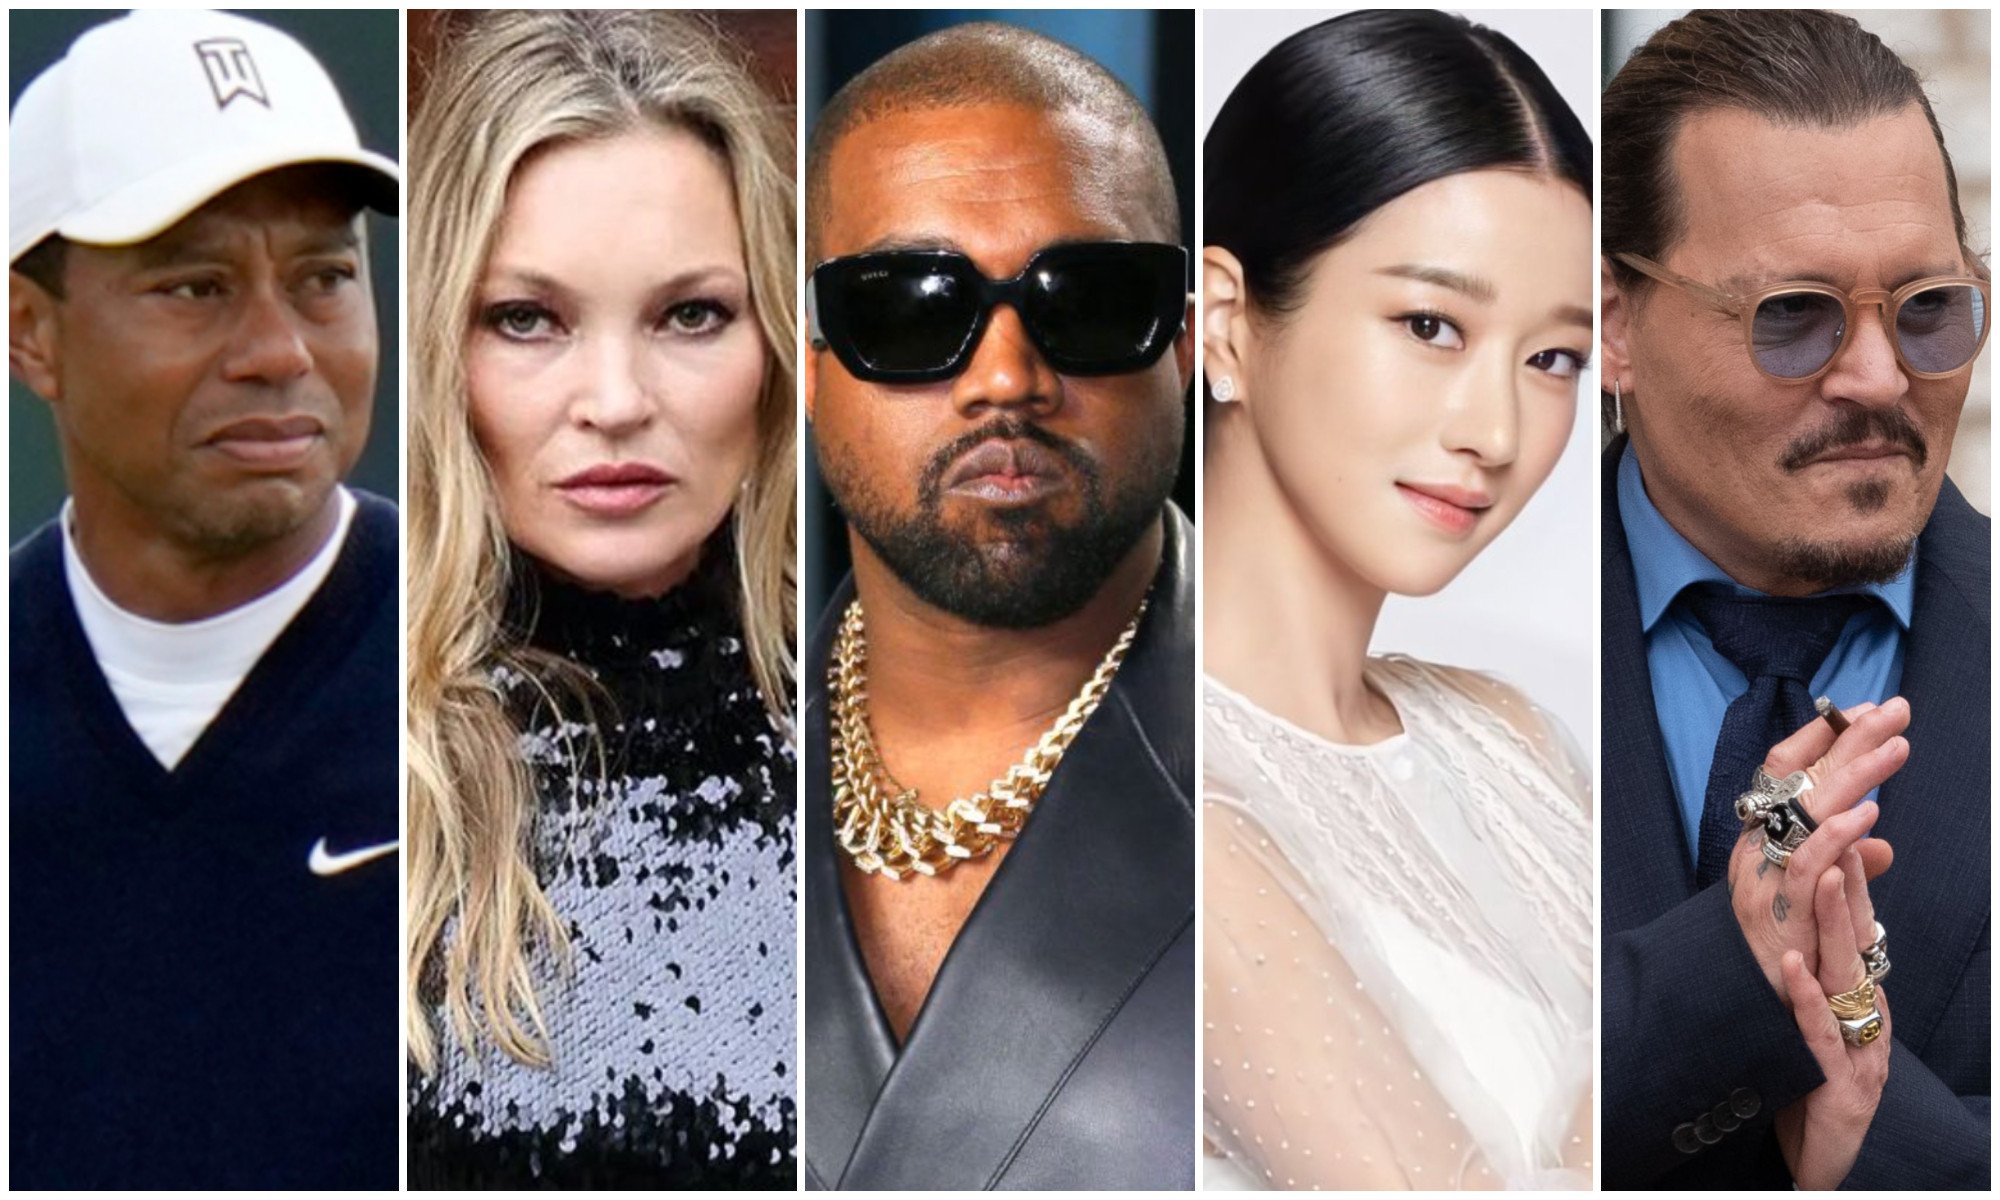 Tiger Woods, Kate Moss, Kanye West aka Ye, Seo Ye-ji and Johnny Depp were all dropped by brands at some point. Photos: AP, @katemossphoto/Instagram, AFP, @Yejisdoormat/Twitter